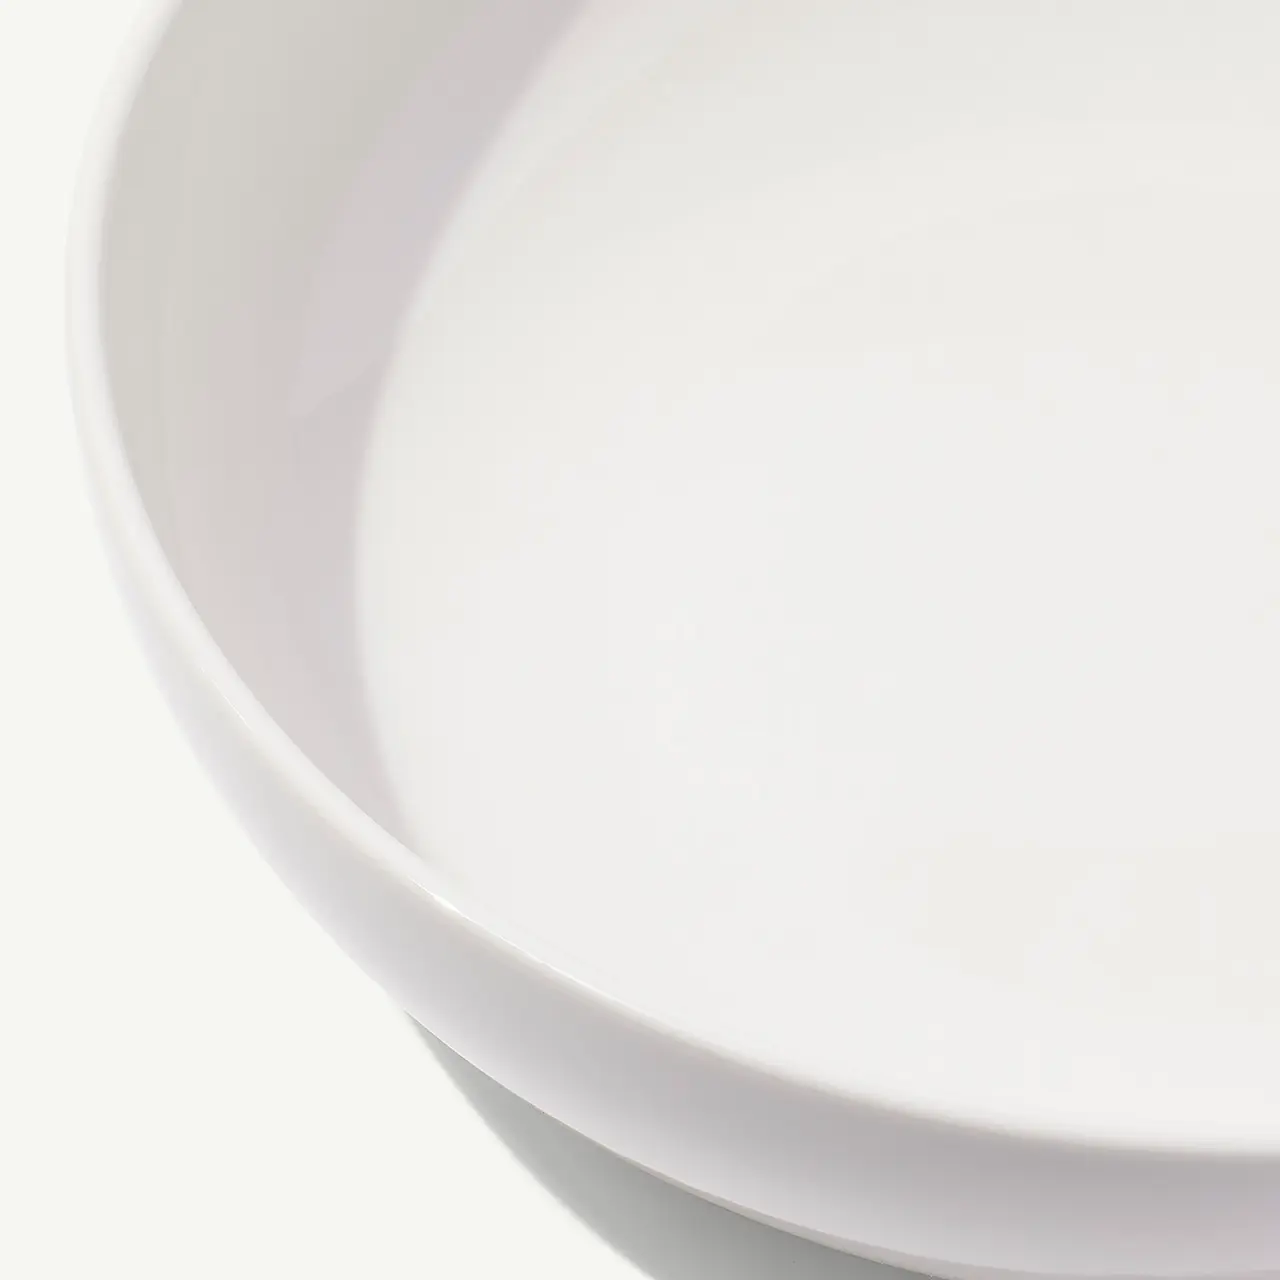 A close-up view of a simple, empty white bowl against a white background.